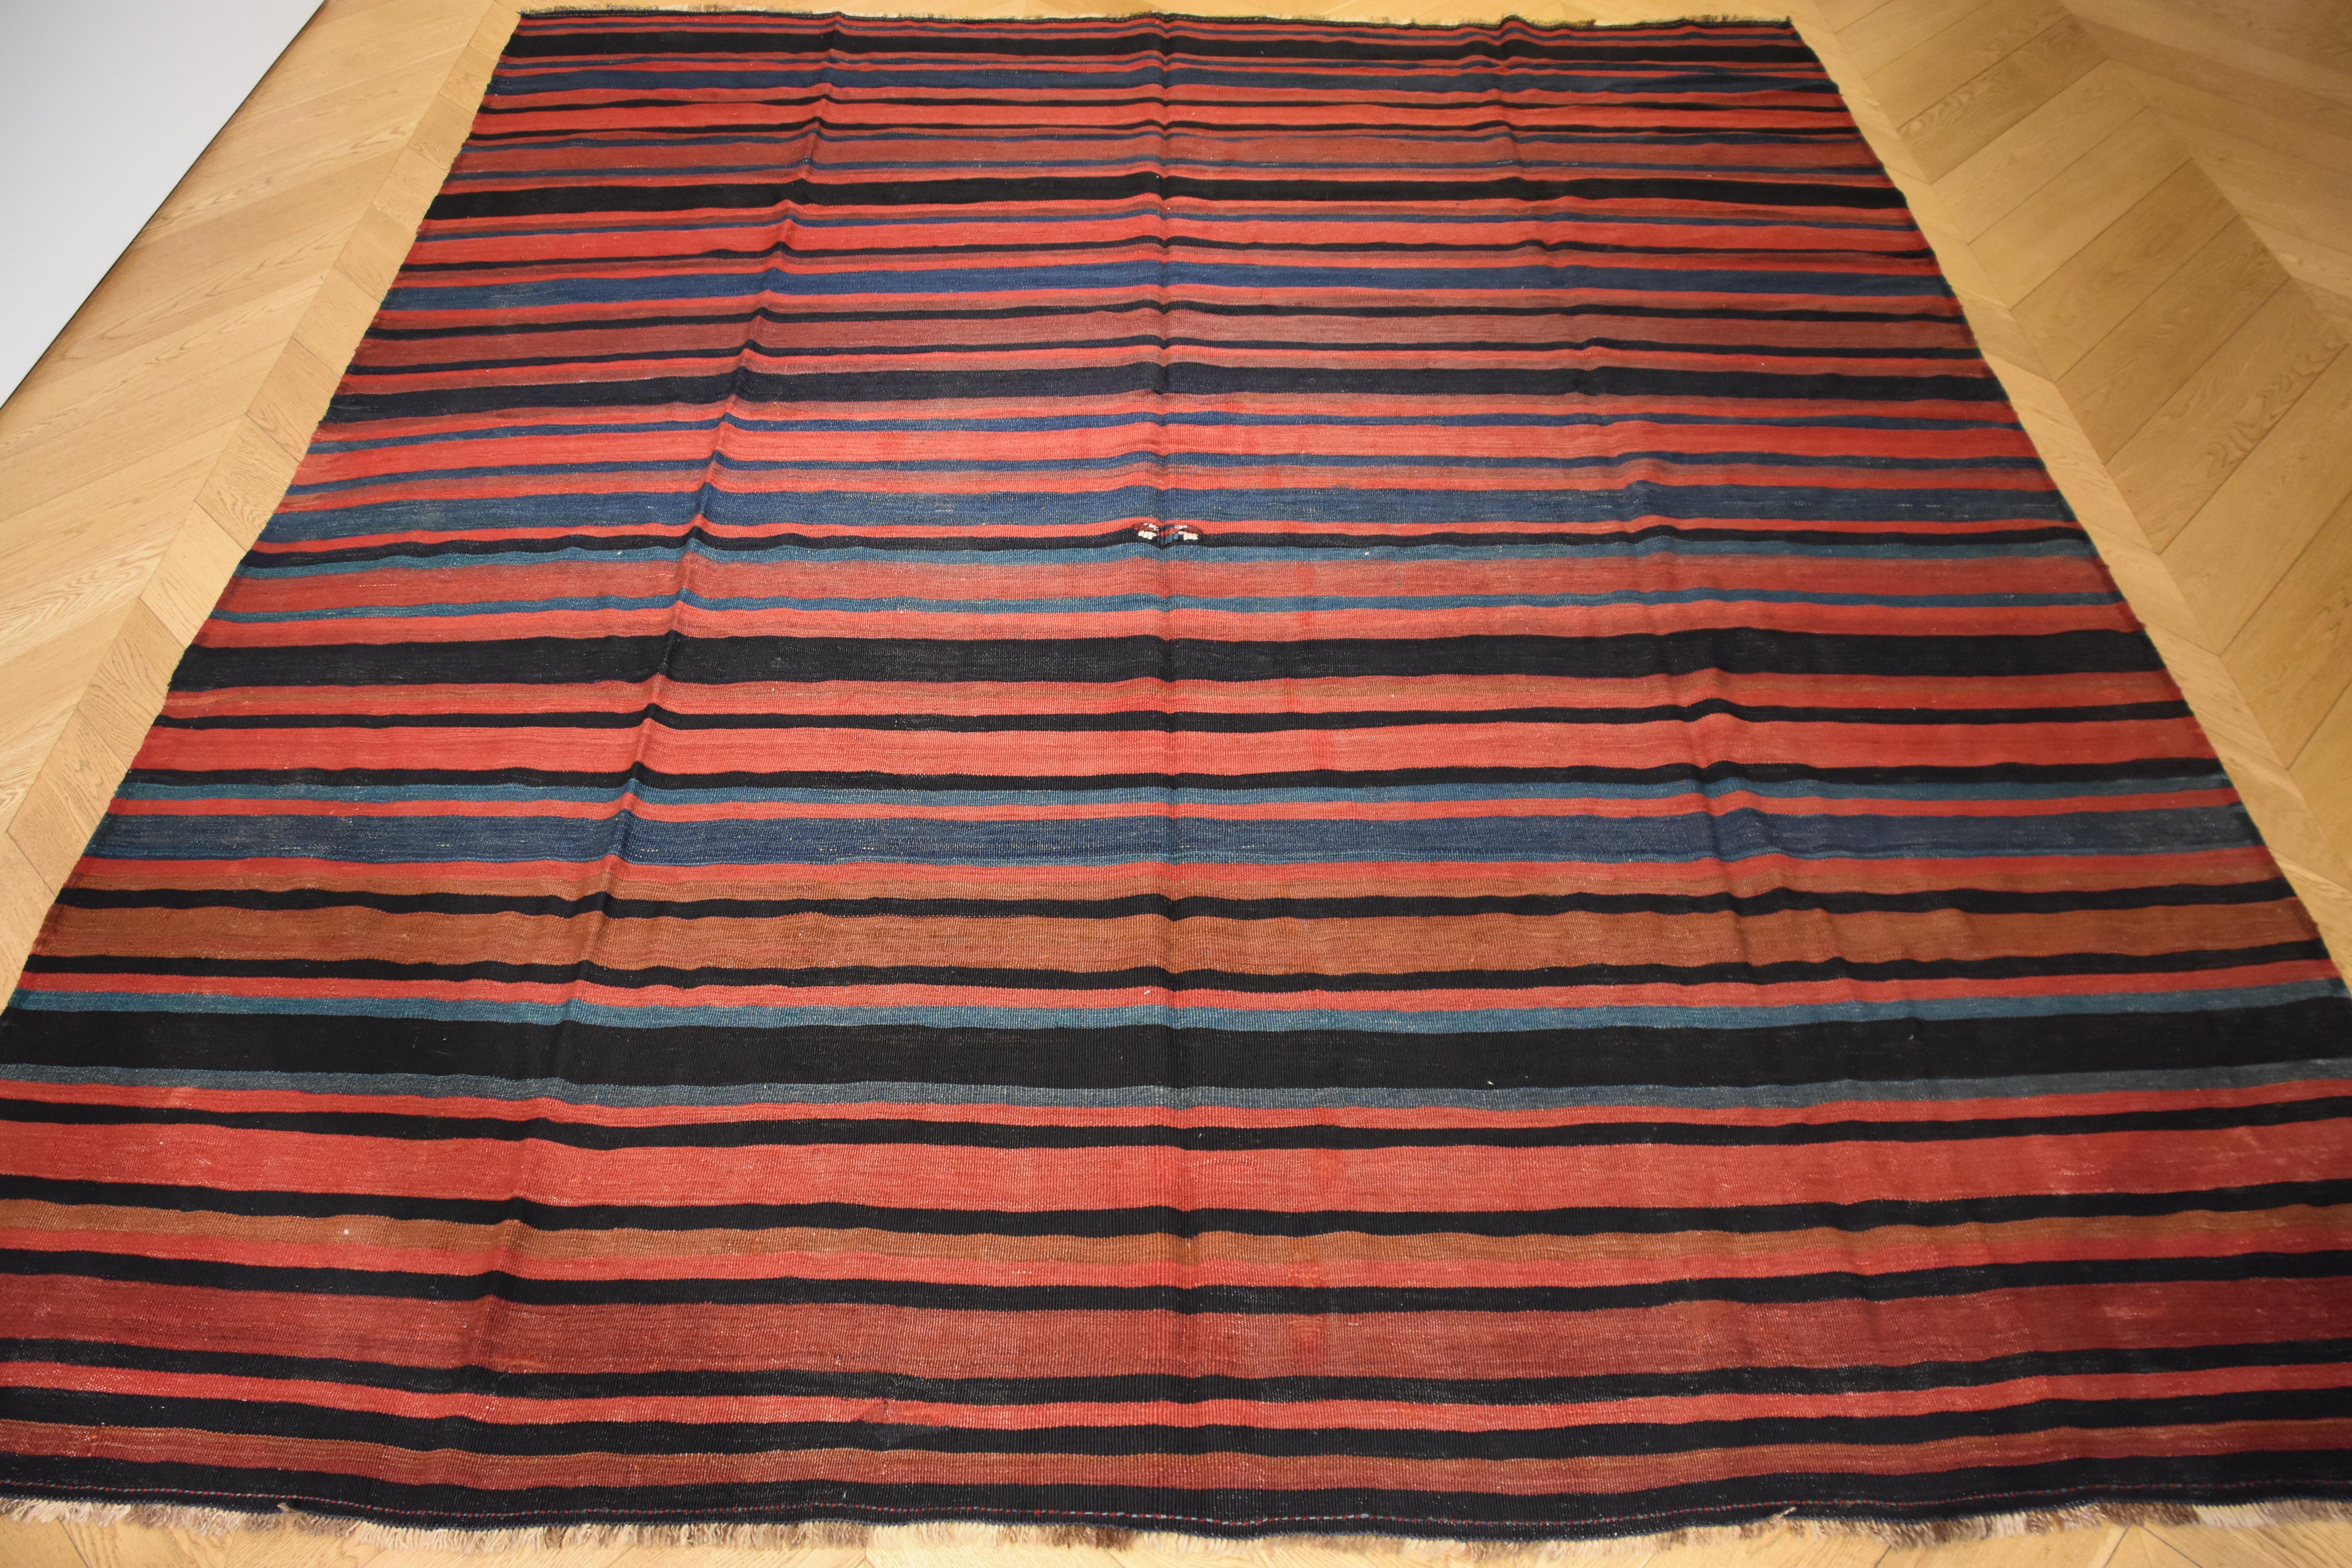 Hand-Knotted 21st Century Red and Blue Nomadic Kurdish Stripes Kilim Rug in Wool, circa 1900s For Sale